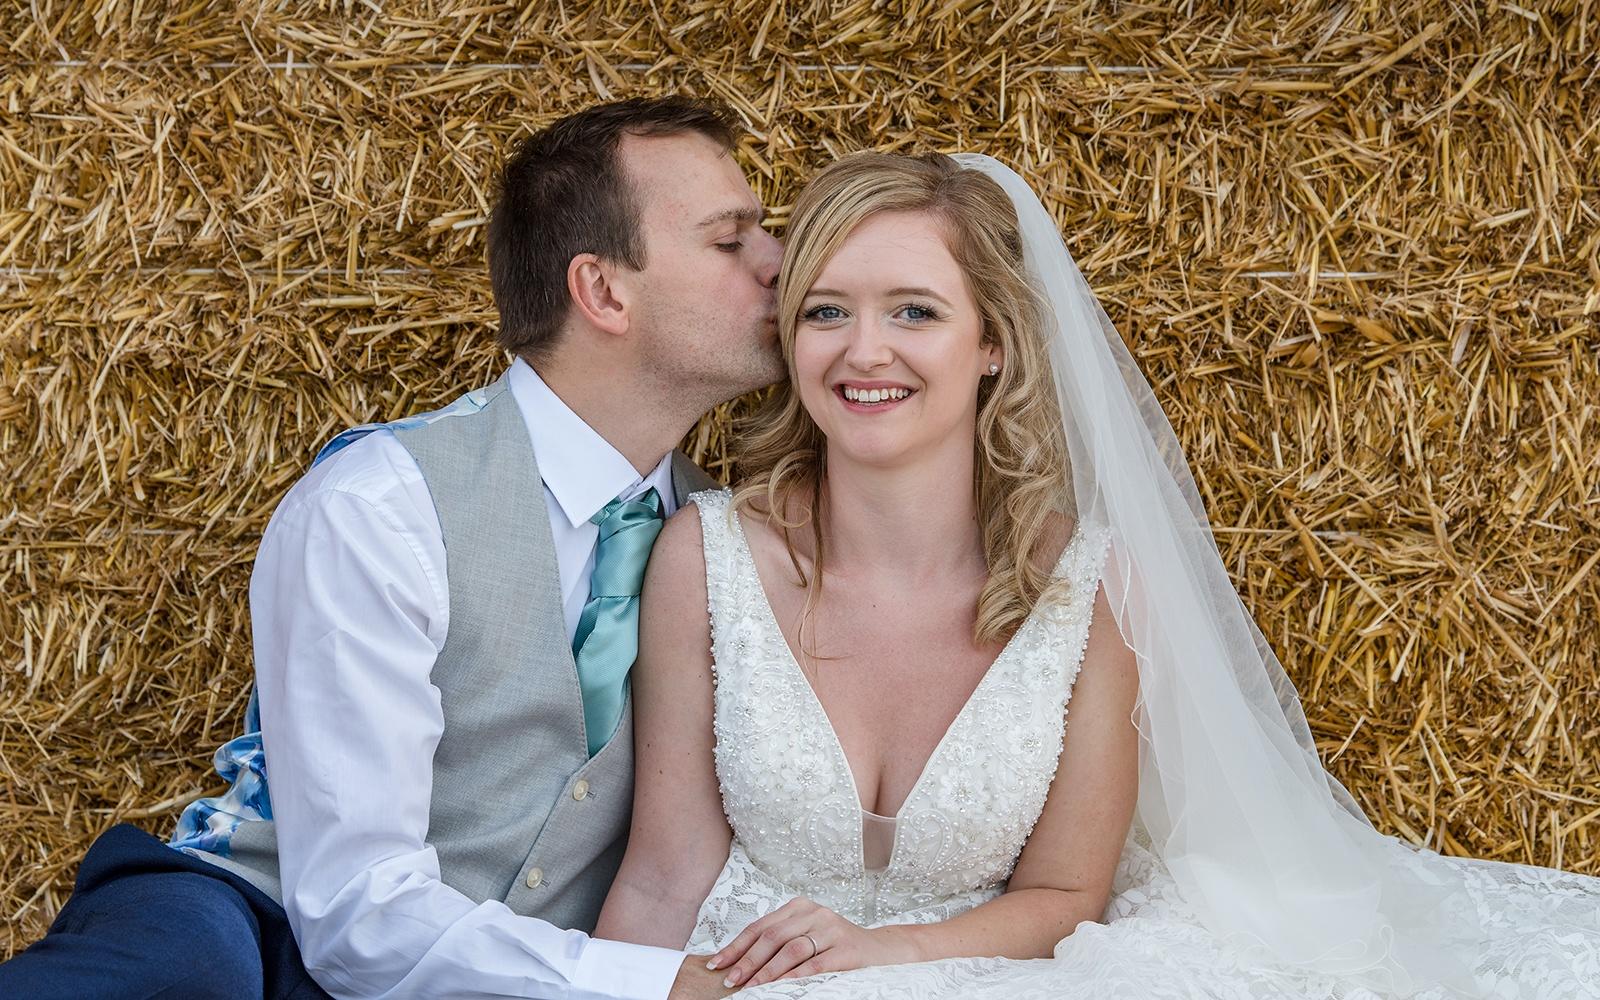 Capture Every Moment real wedding photography duo photographer Cirencester  Church of St Mary The Virgin Bampton Spittleborough Farm Wiltshire hay bales rustic wedding day